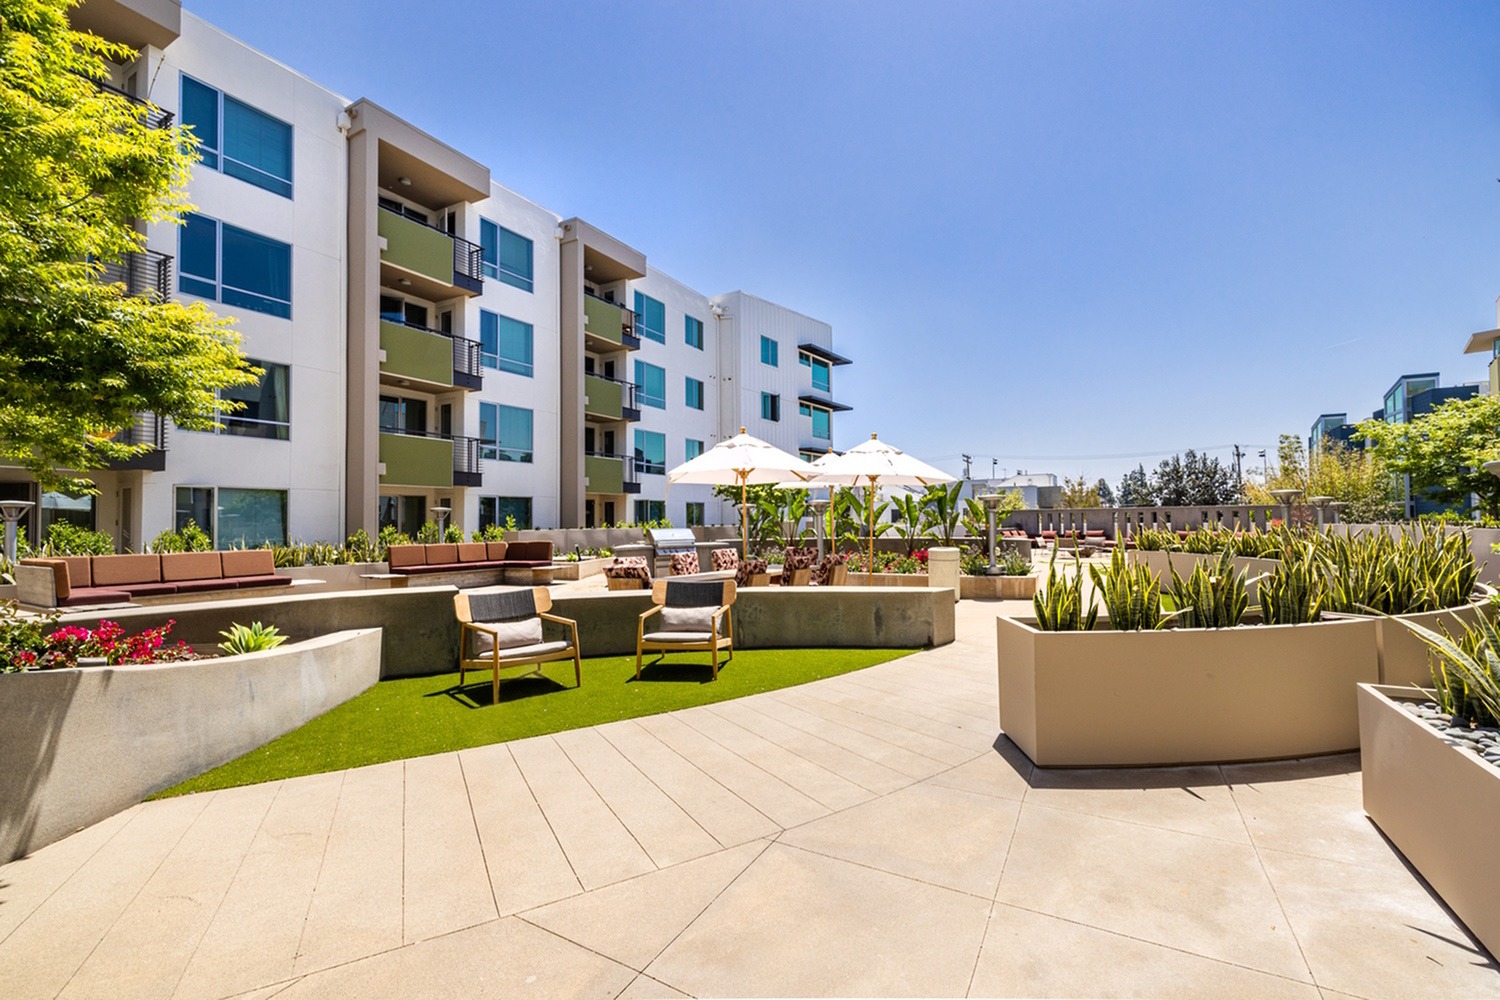 Green Spaces | Brio Apartments | Apartments in Glendale, CA